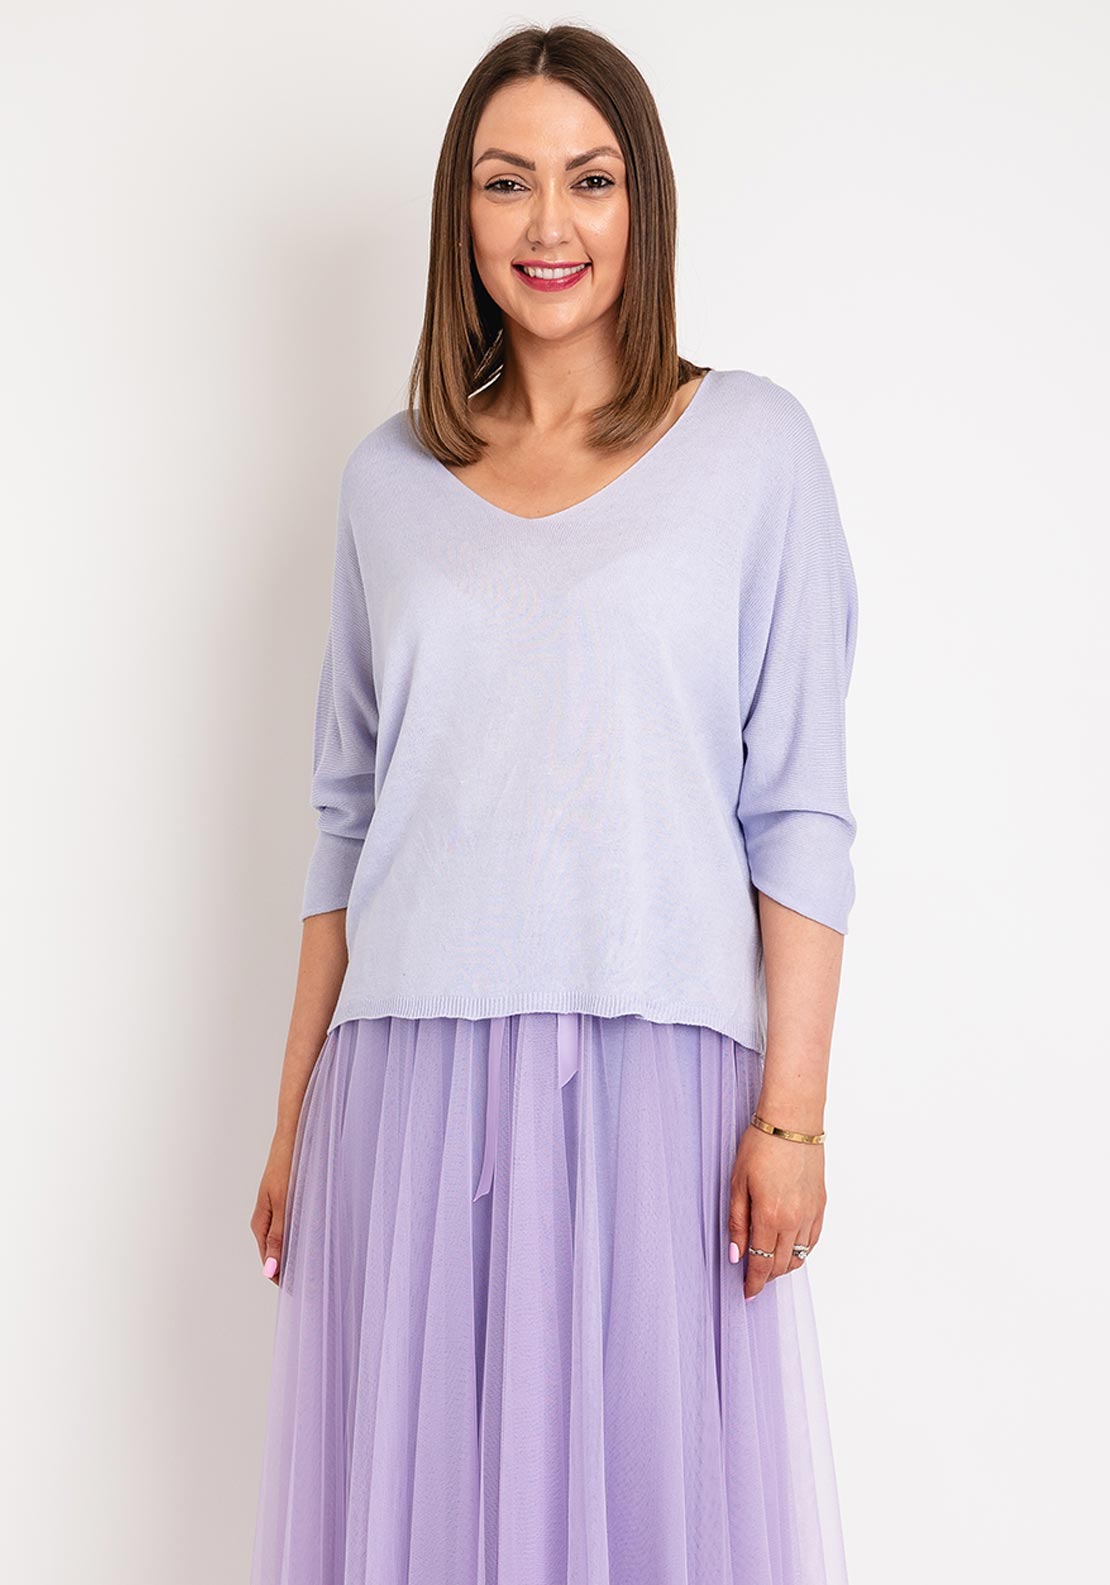 Serafina Collection One Size Fine Knit Sweater, Lilac - McElhinneys